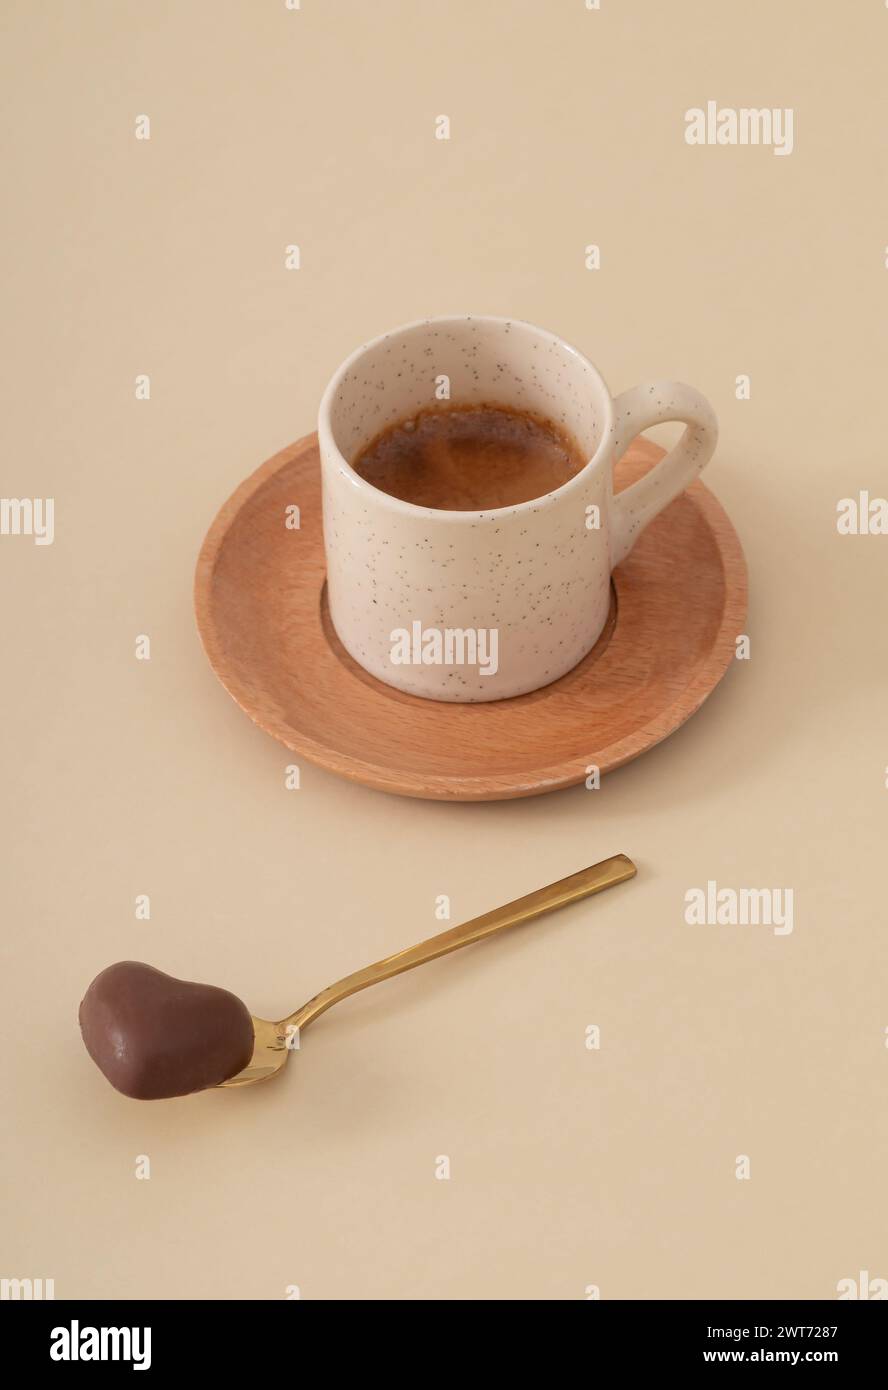 Romantic layout made with cup of coffee and chocolate heart on pastel beige background. Minimal concept. Creative trendy coffee with love idea. Stock Photo